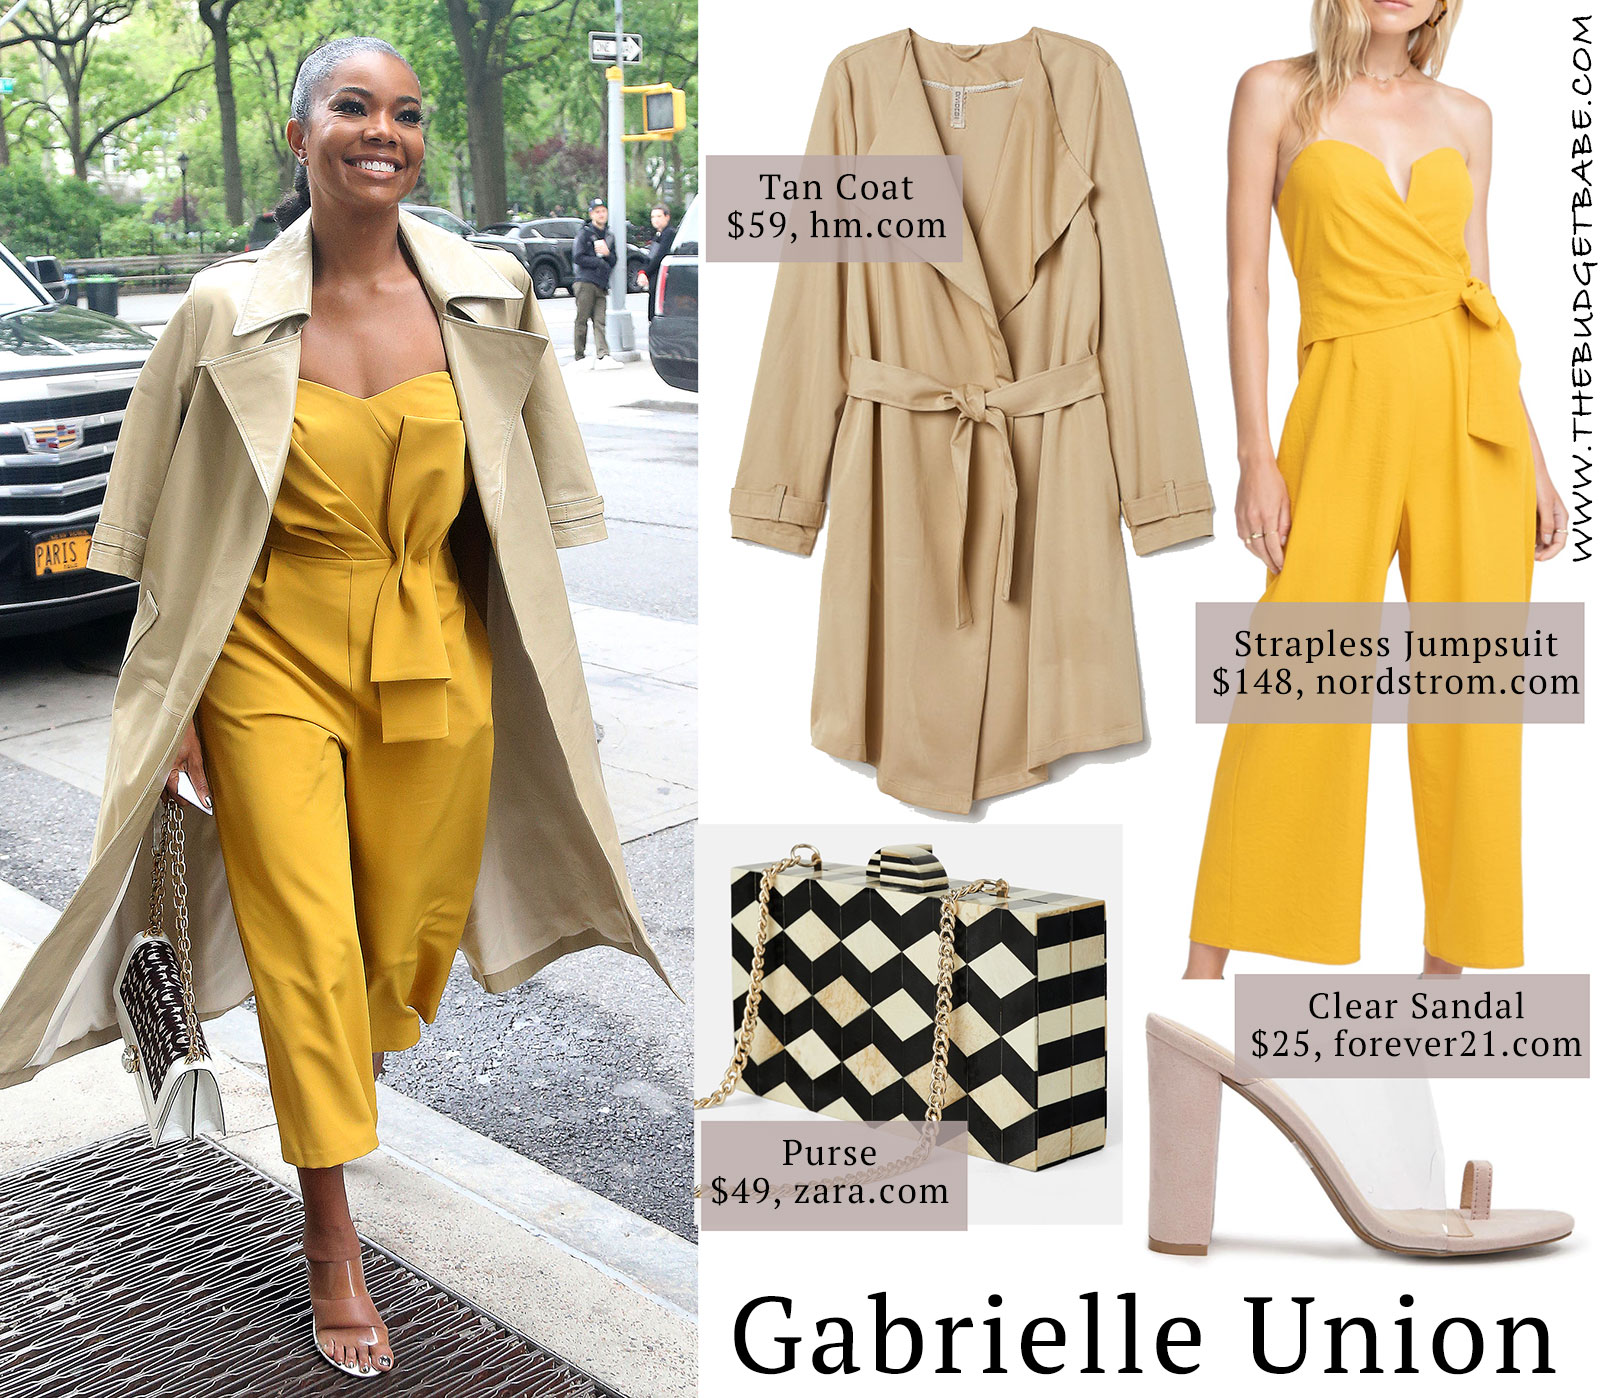 Gabrielle Union's yellow jumpsuit and clear sandals look for less